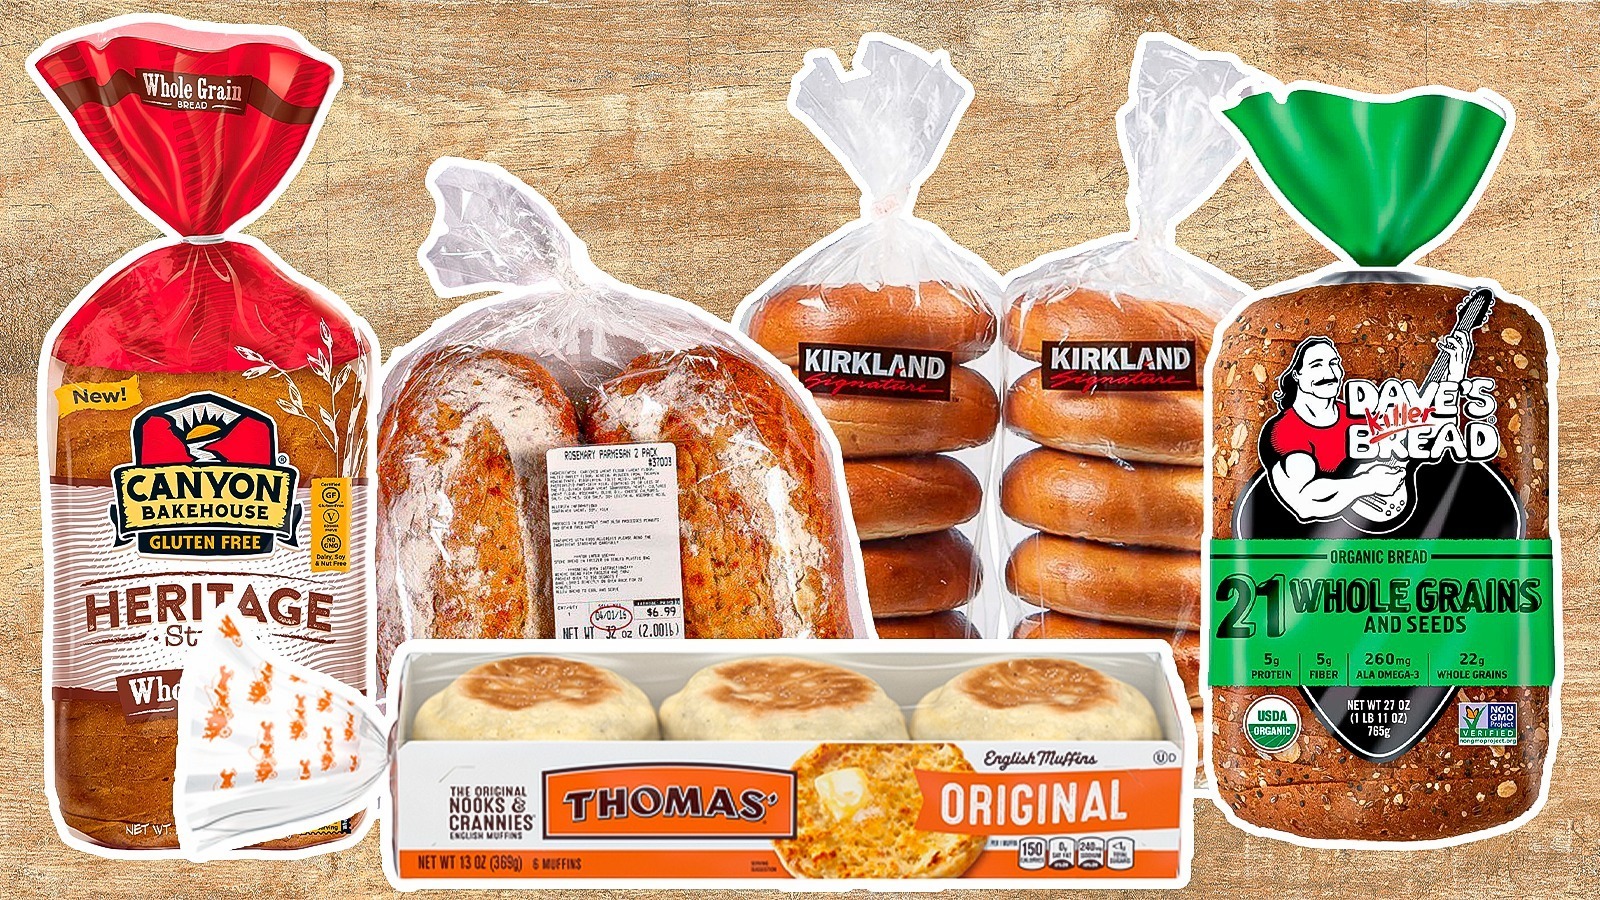 https://www.thedailymeal.com/img/gallery/10-breads-to-pick-up-at-costco/l-intro-1686927428.jpg